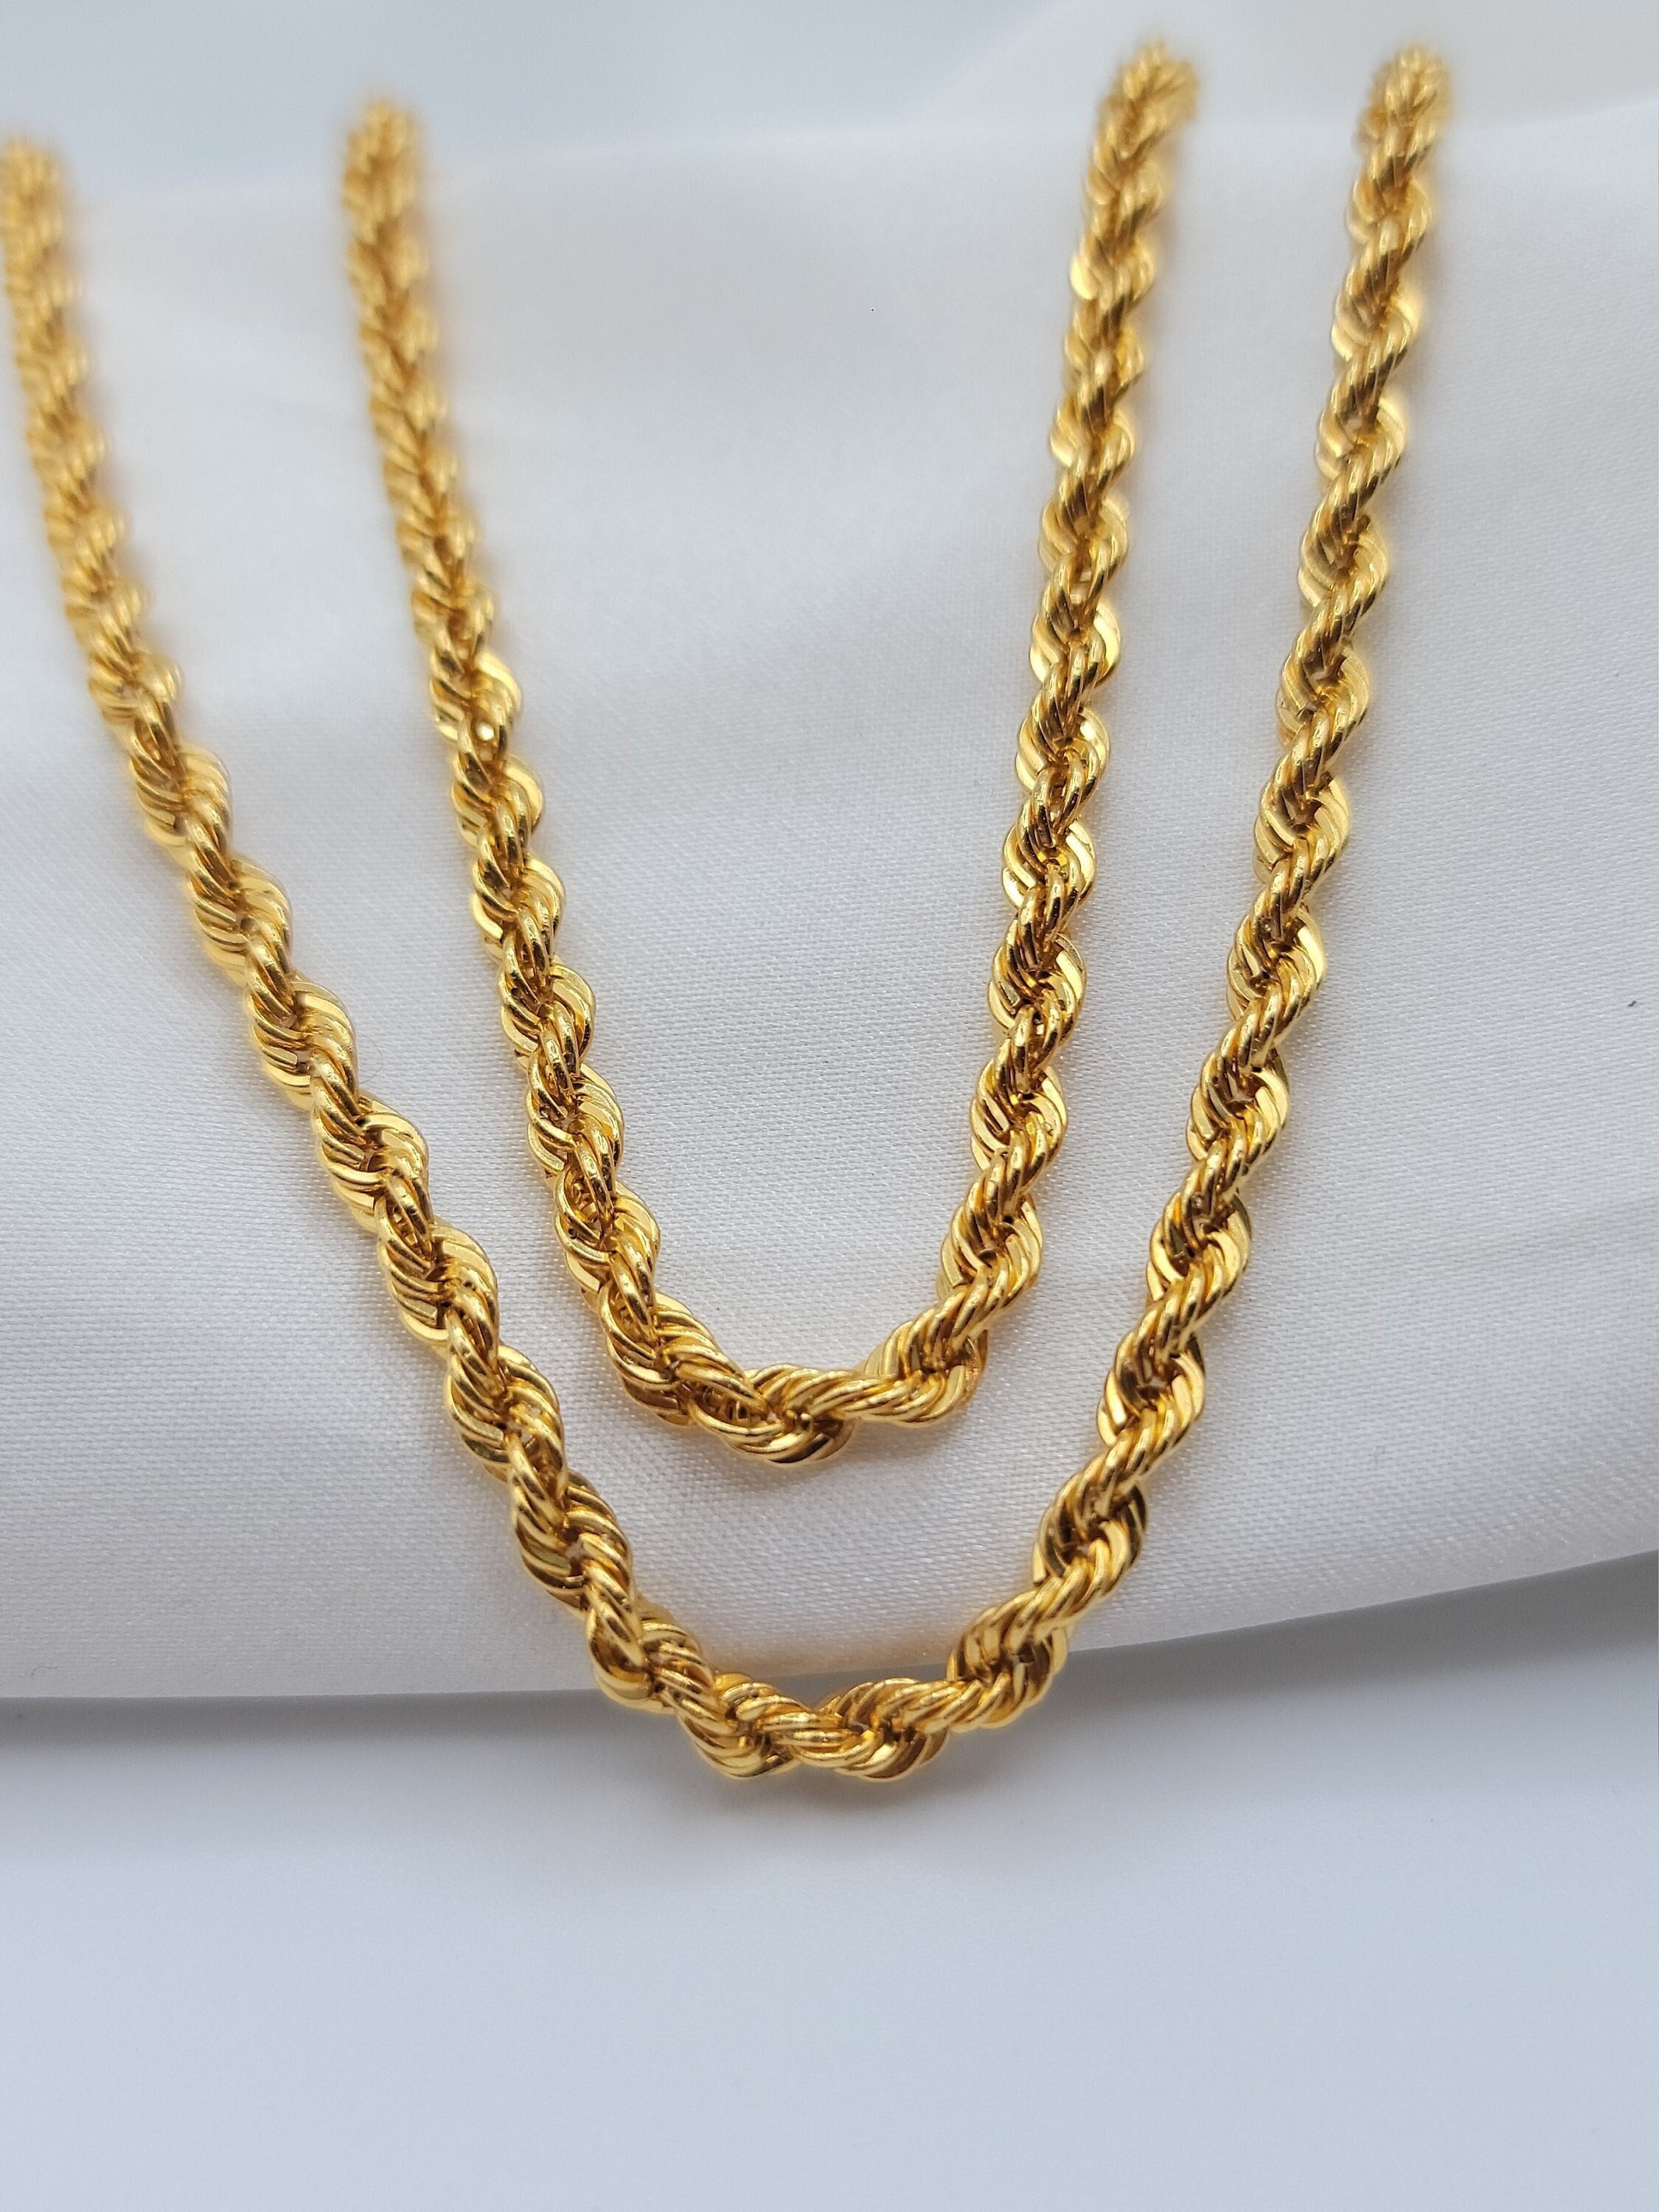 14K Solid Gold Rope Chain Necklace, 4.5mm- 23.5 Real 14K Gold Rope